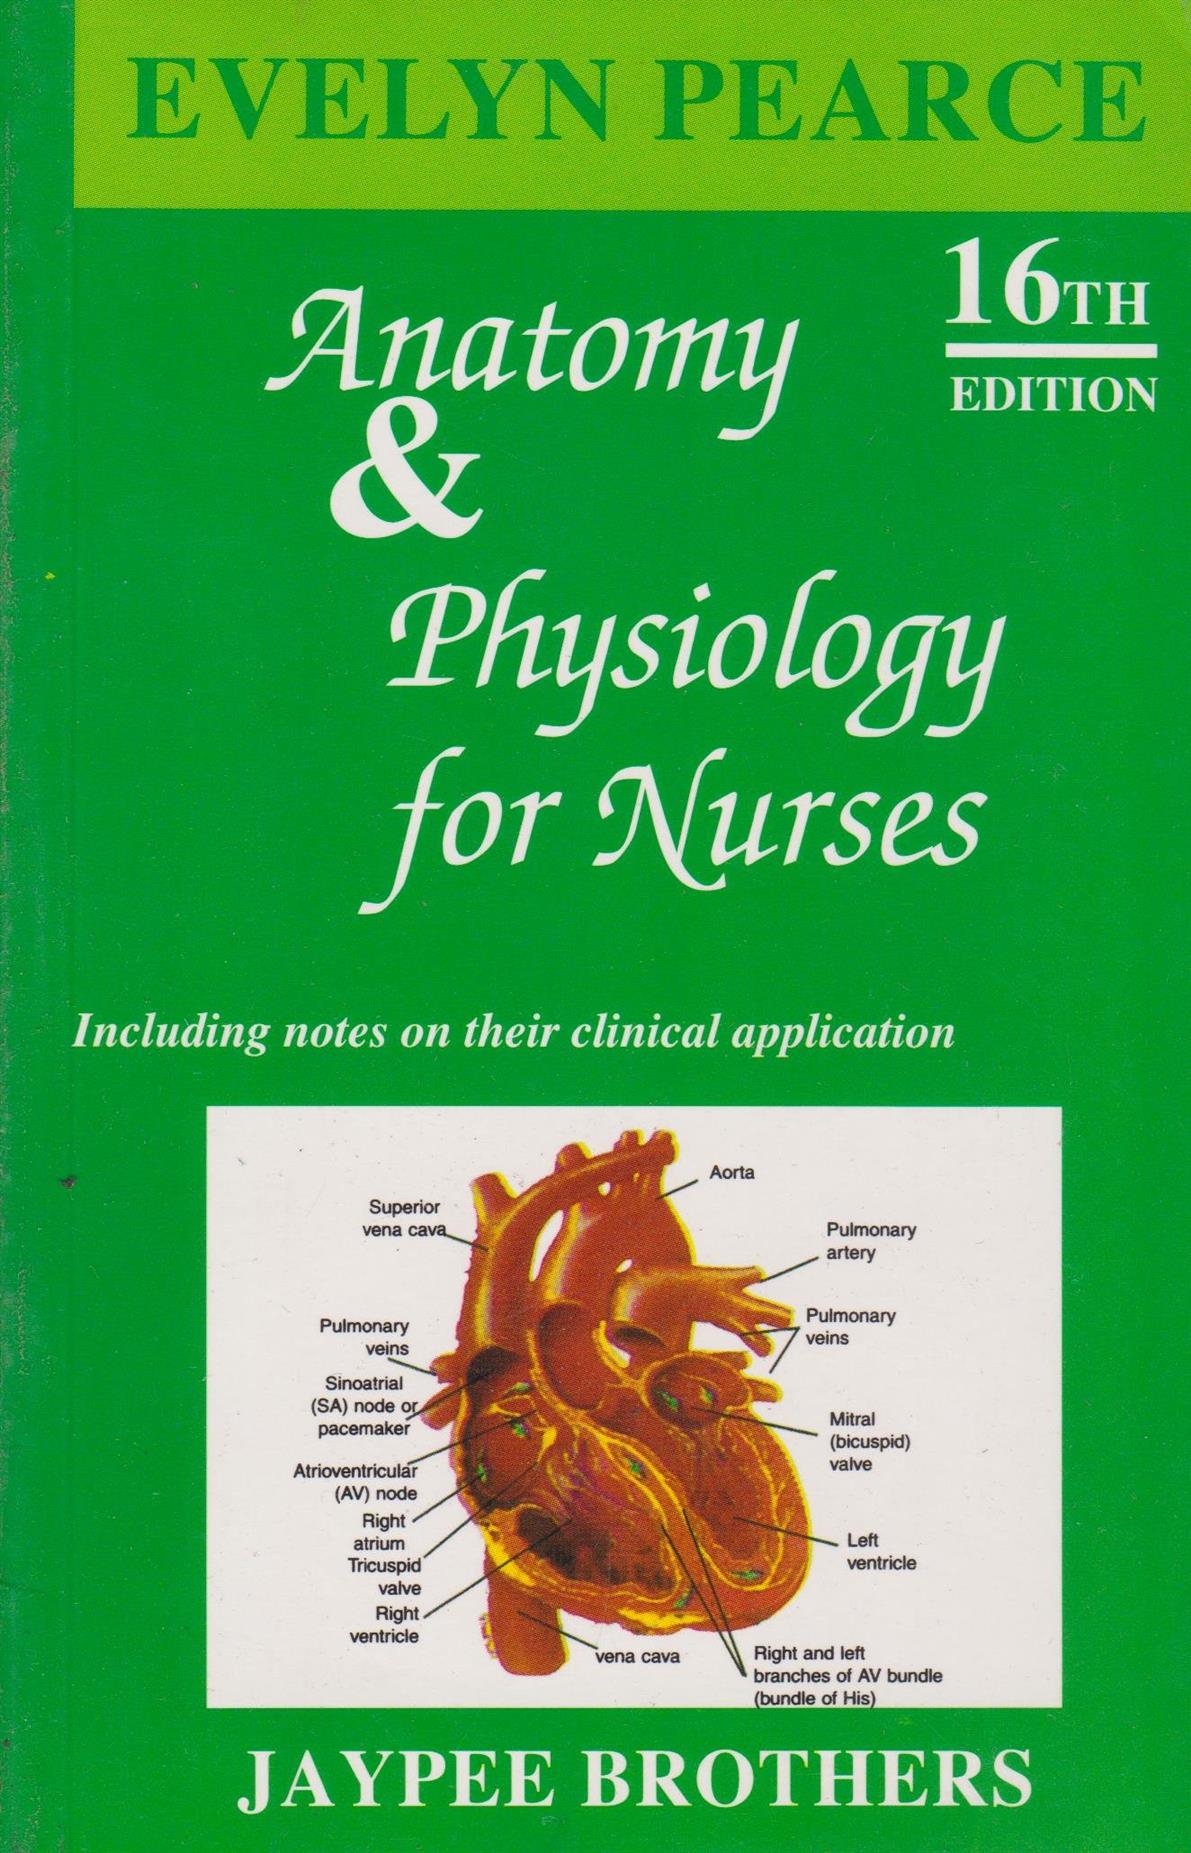 ANATOMY AND PHYSIOLOGY FOR NURSES EVELYN PEARCE 16th edition